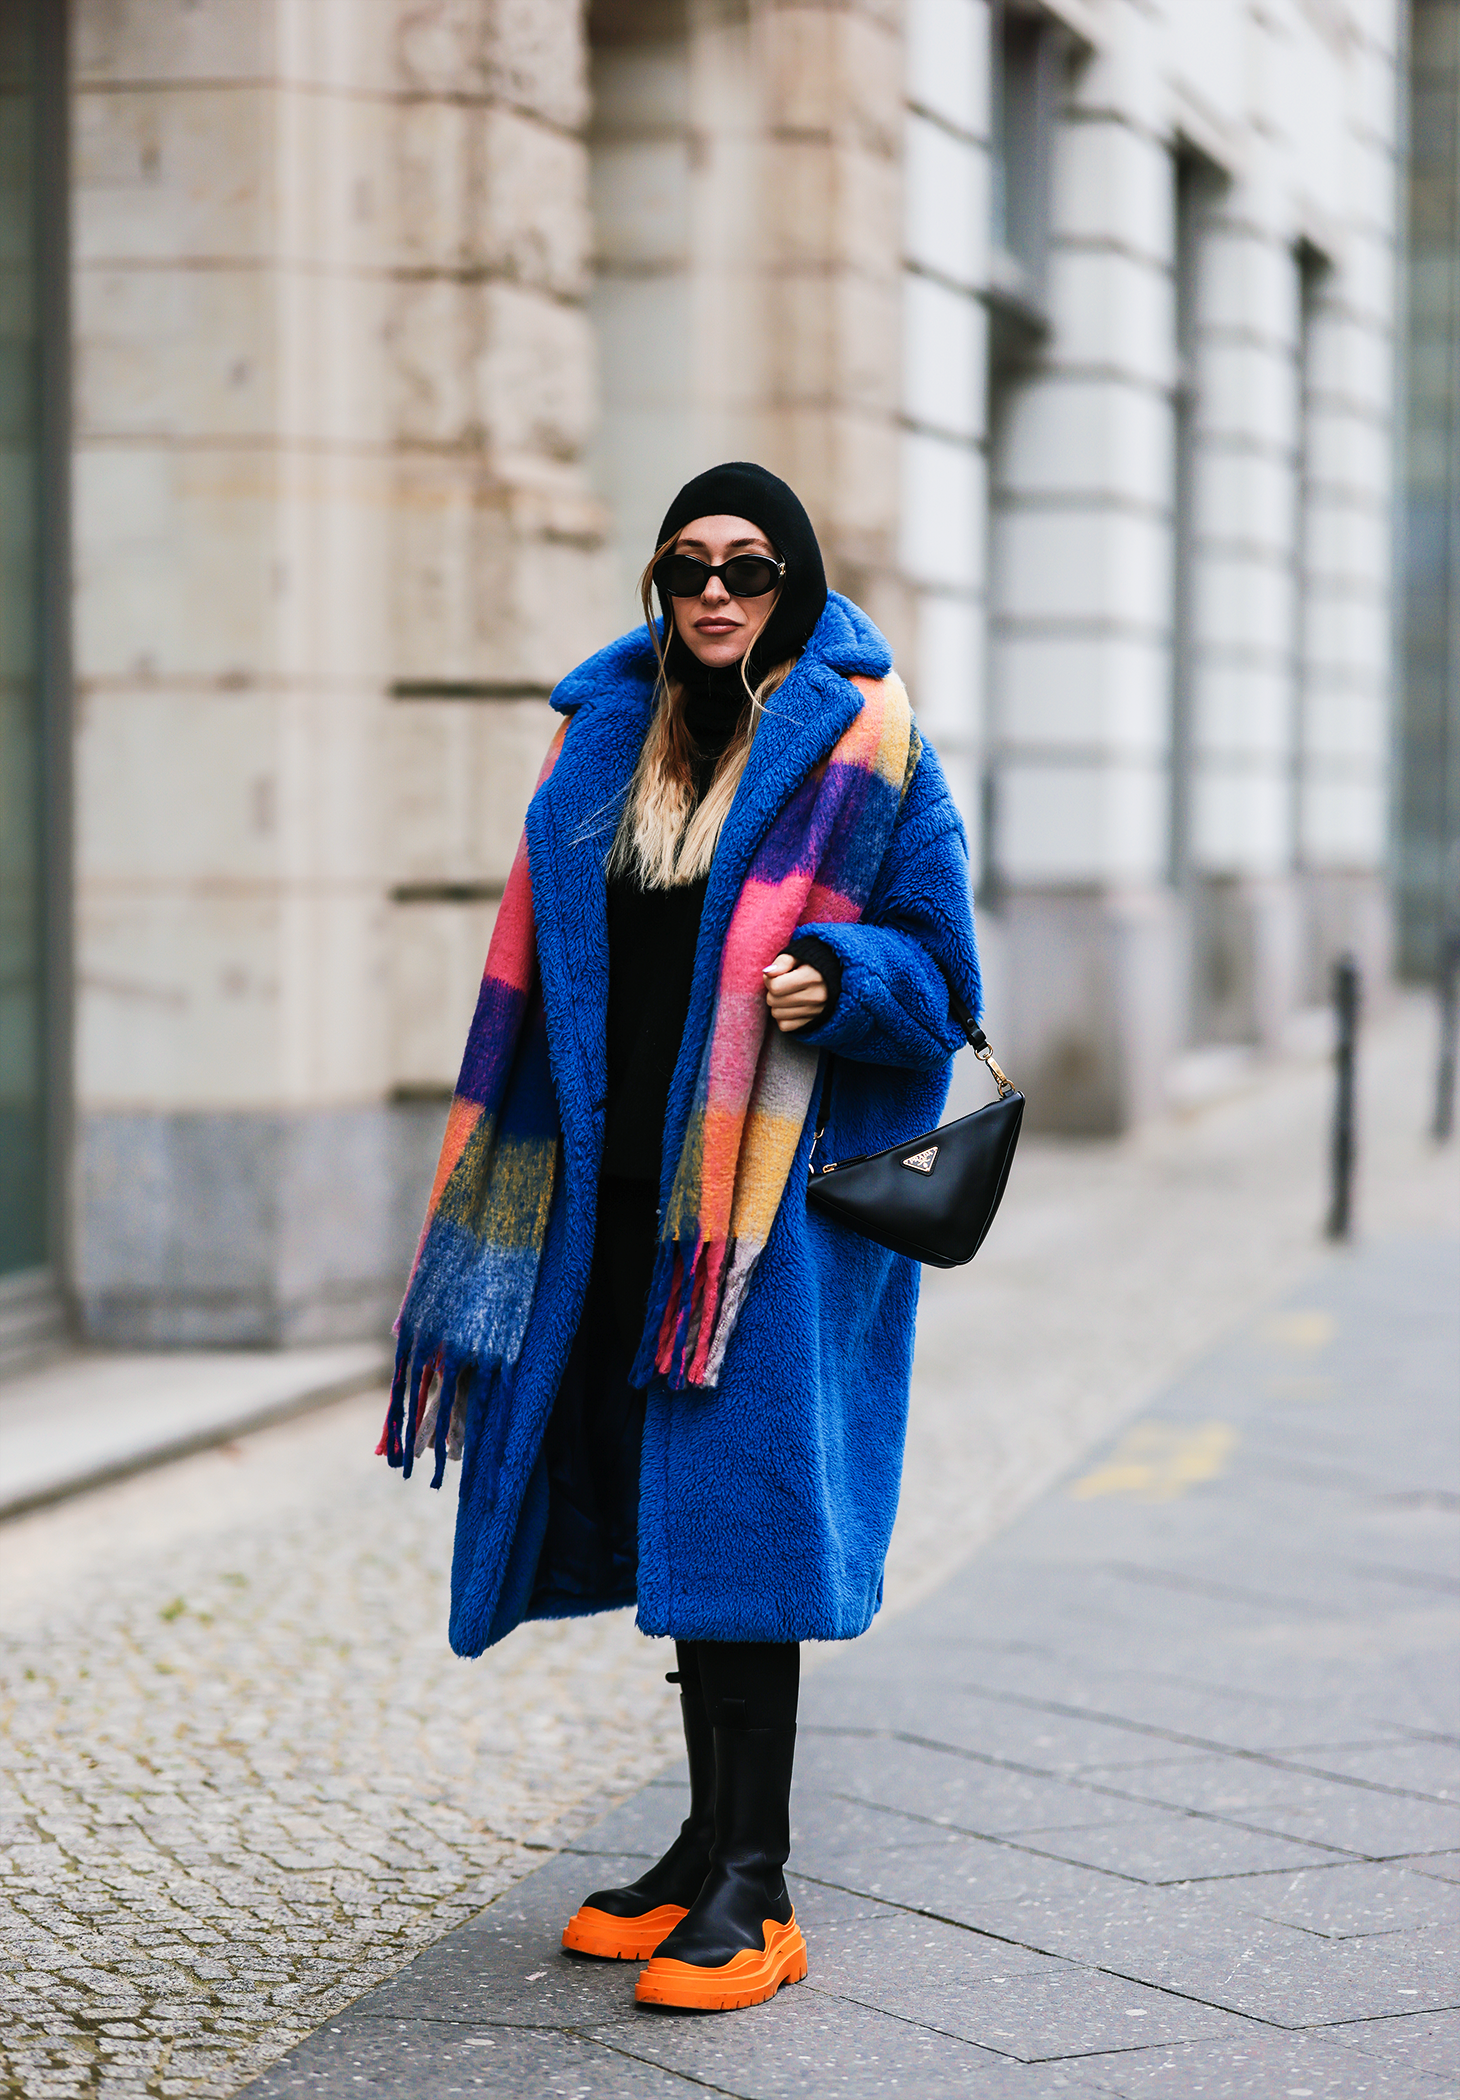 Dressing Up for Winter, US fashion